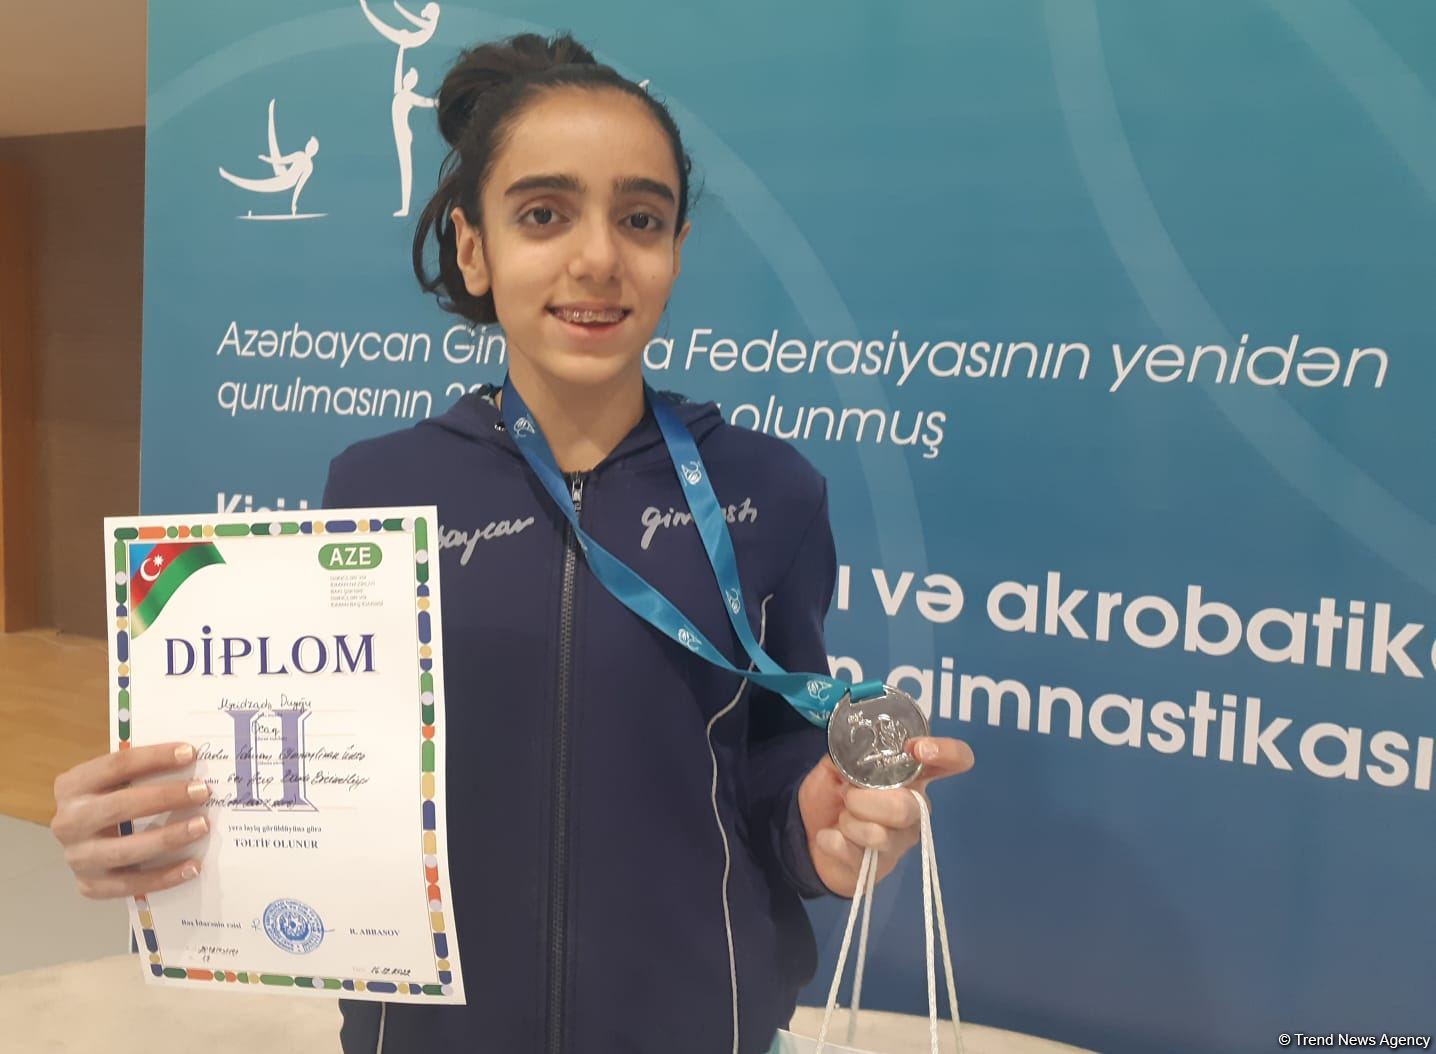 Silver medal of Joint Baku Championship to take rightful position among my sports awards – gymnast